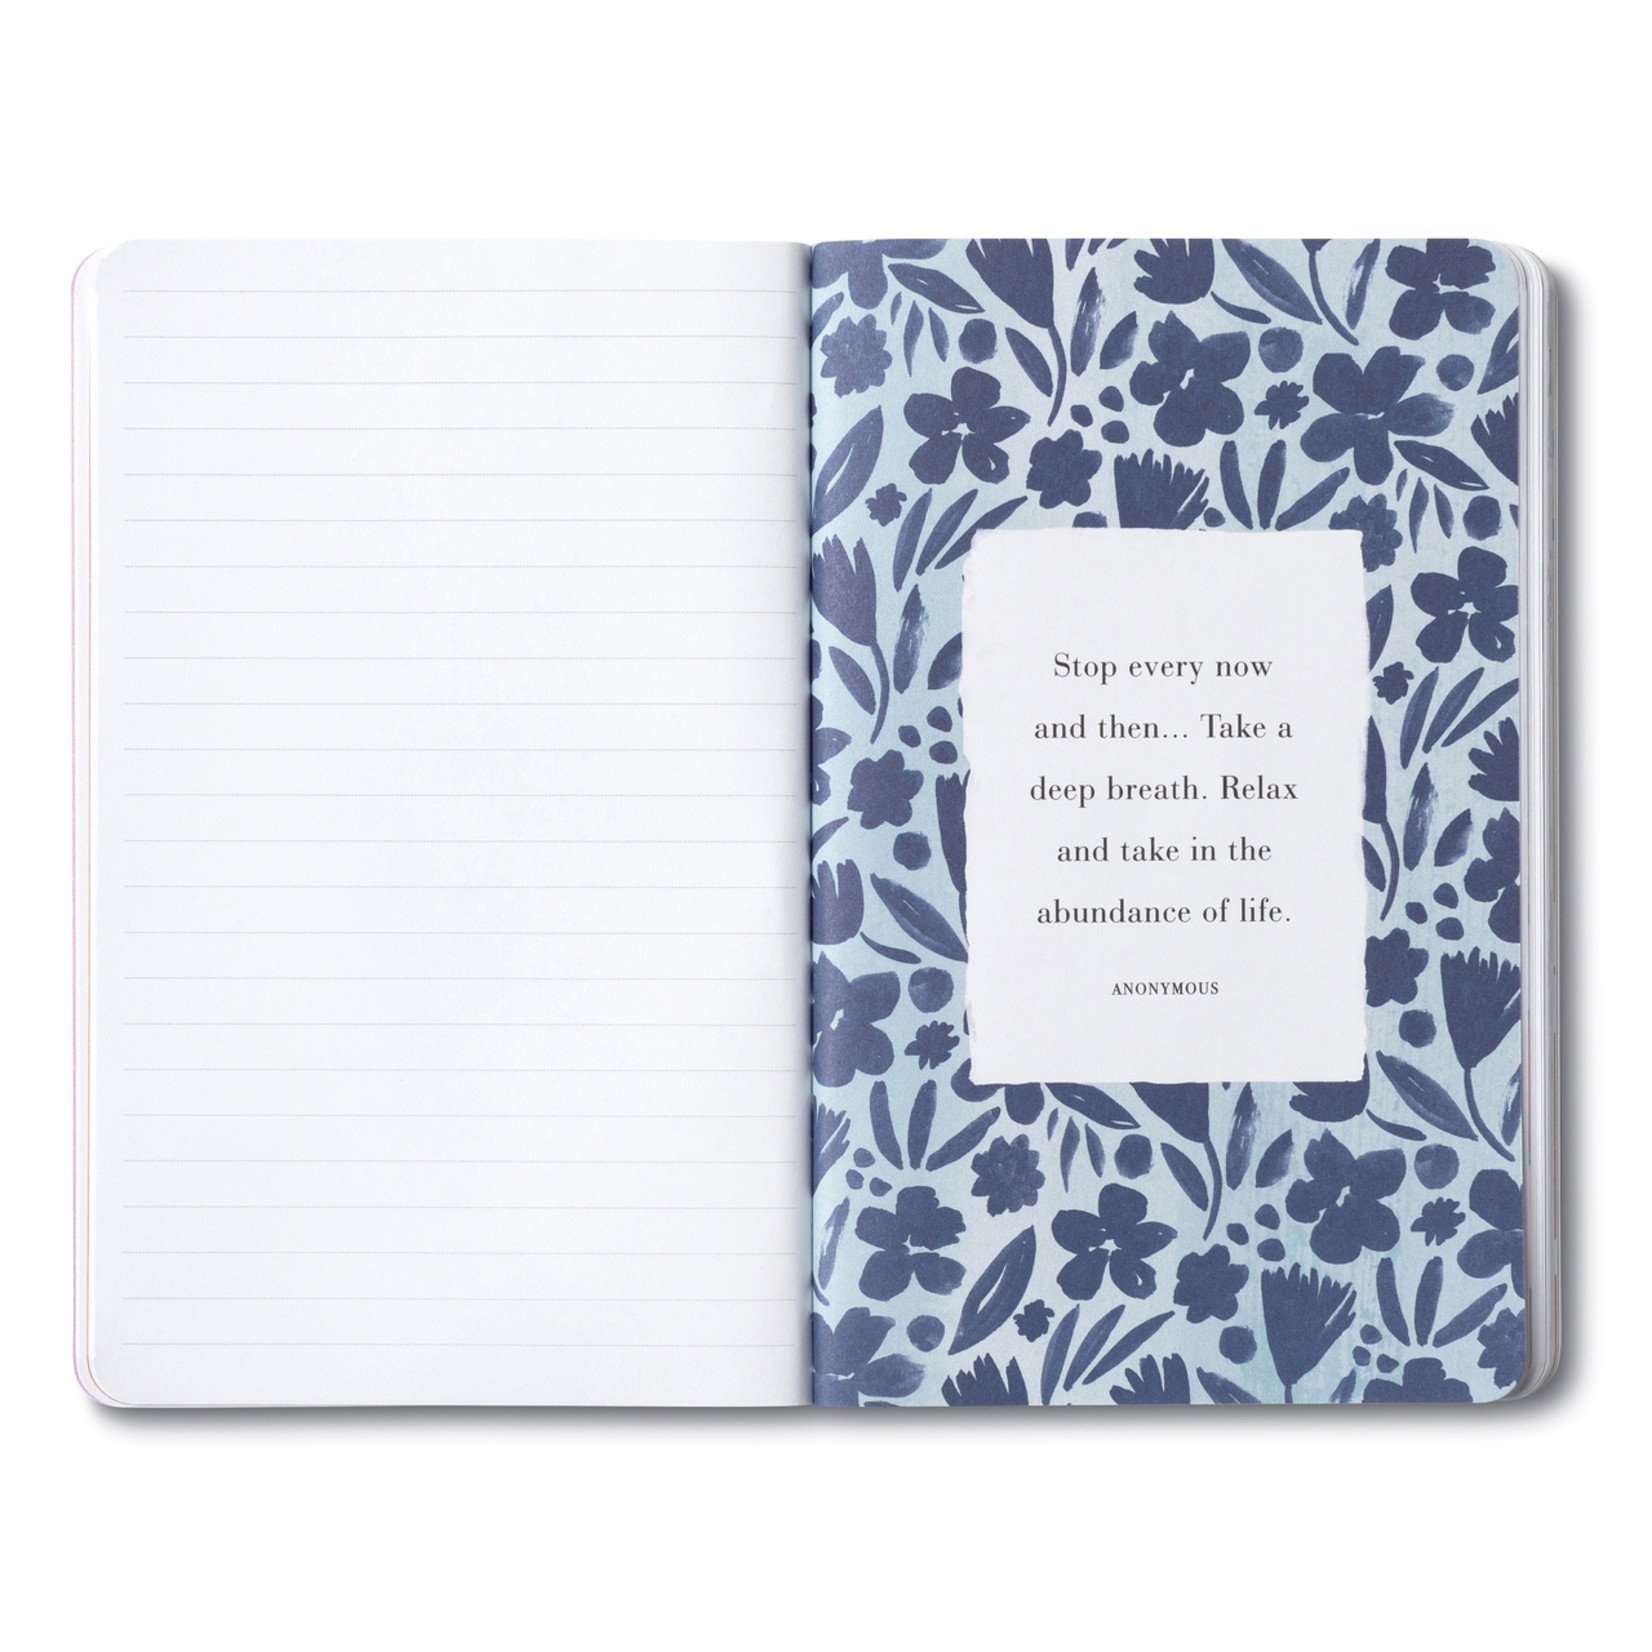 COMPENDIUM WRITE NOW JOURNAL - DWELL ON THE BEAUTY OF LIFE